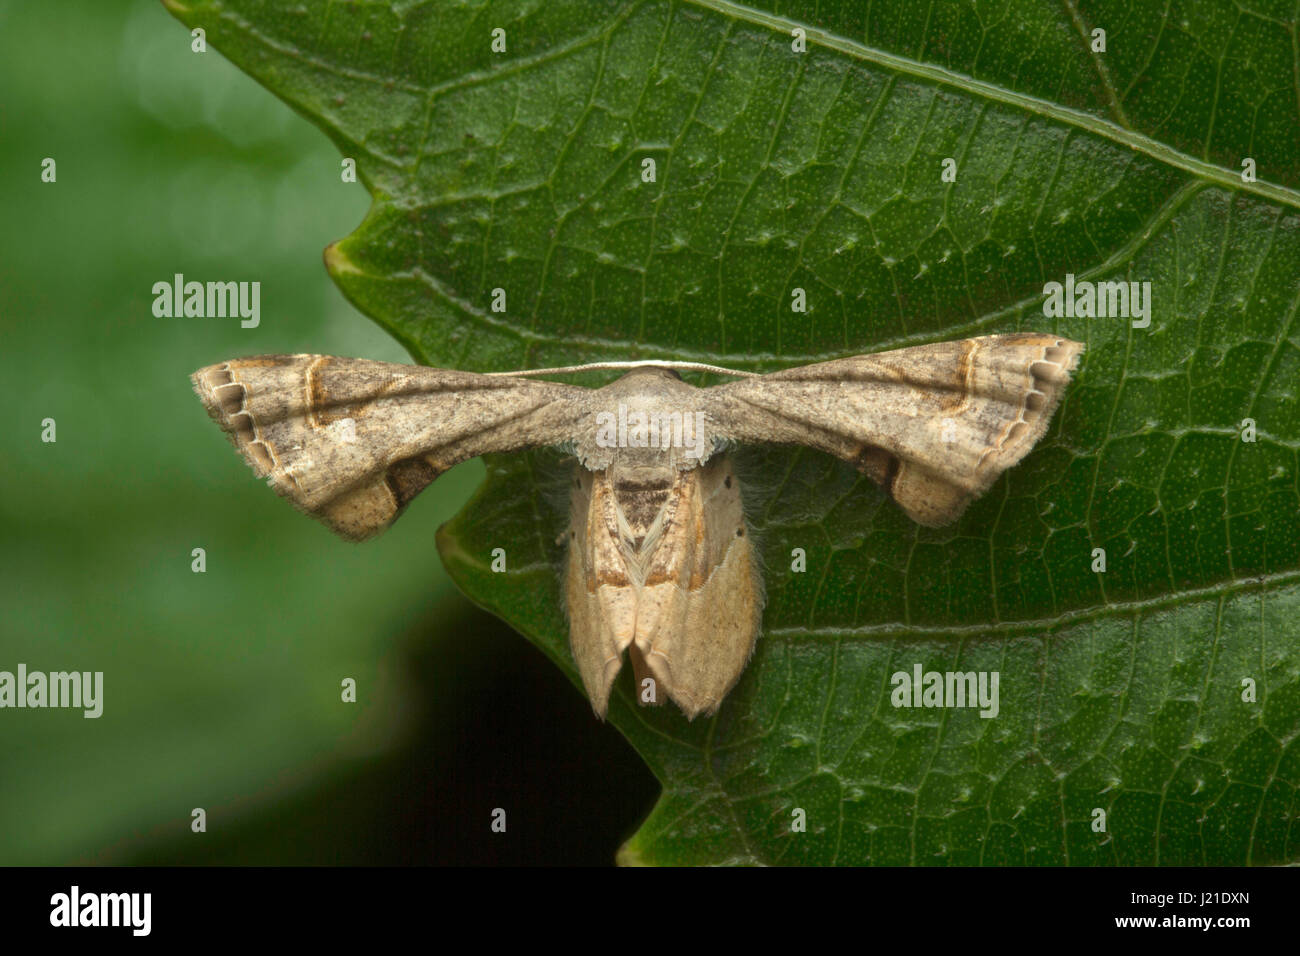 Moth , Aarey Milk Colony , INDIA. The moths are among the most widely studied lepidopterans in the world. Ranging from as small as a few millimeters t Stock Photo